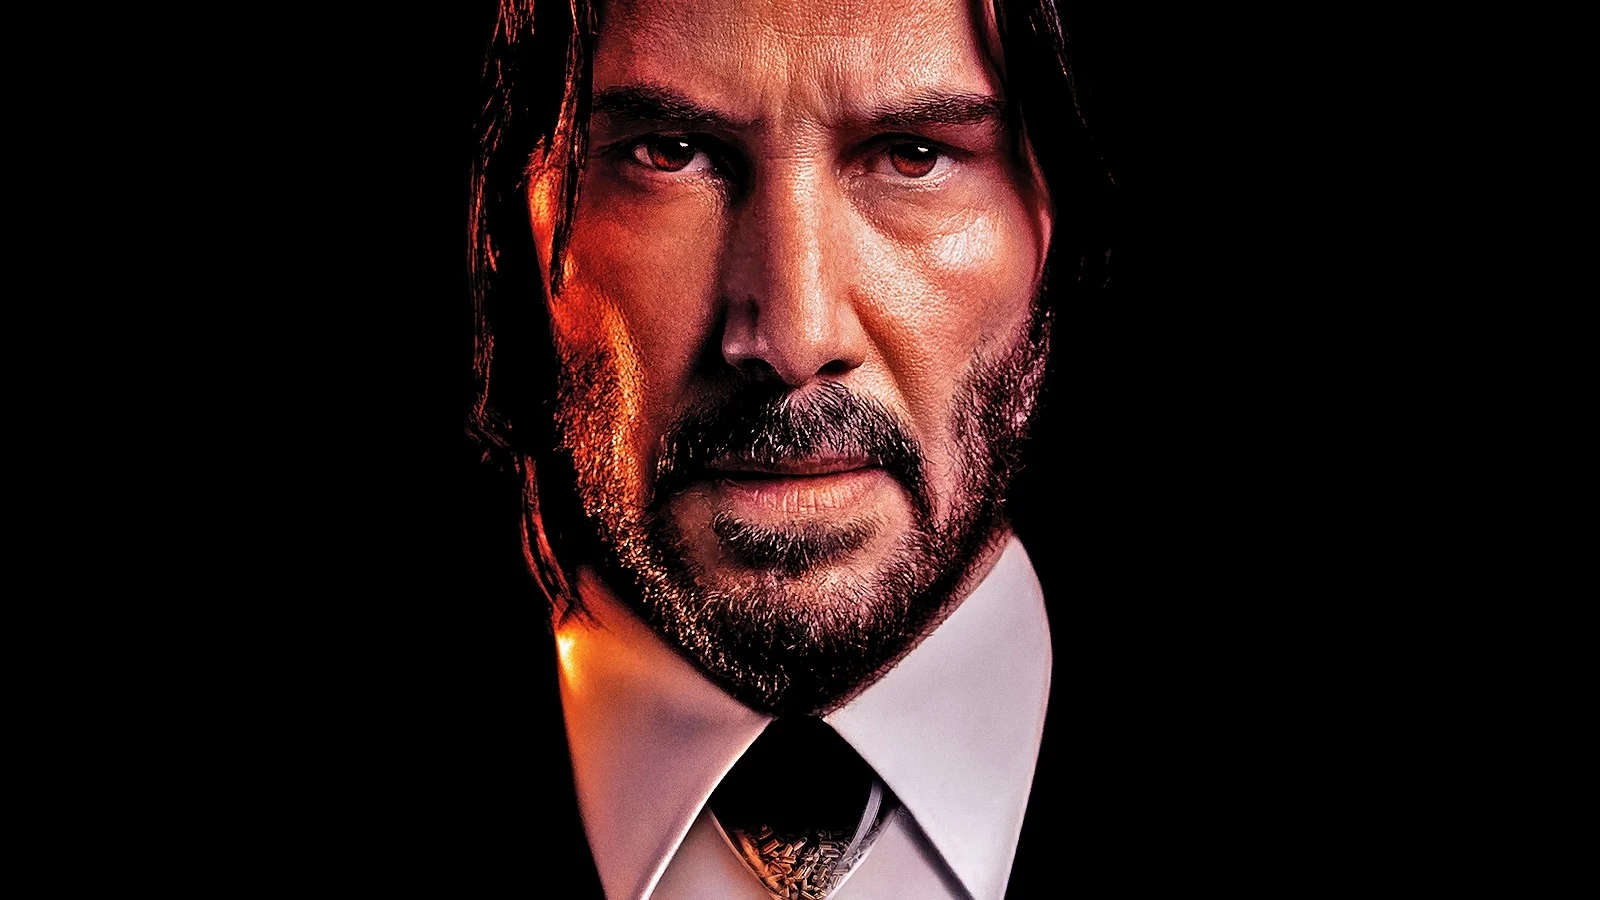 John Wick 4, new record: it is the film in the saga with Keanu Reeves that has grossed the most at the box office